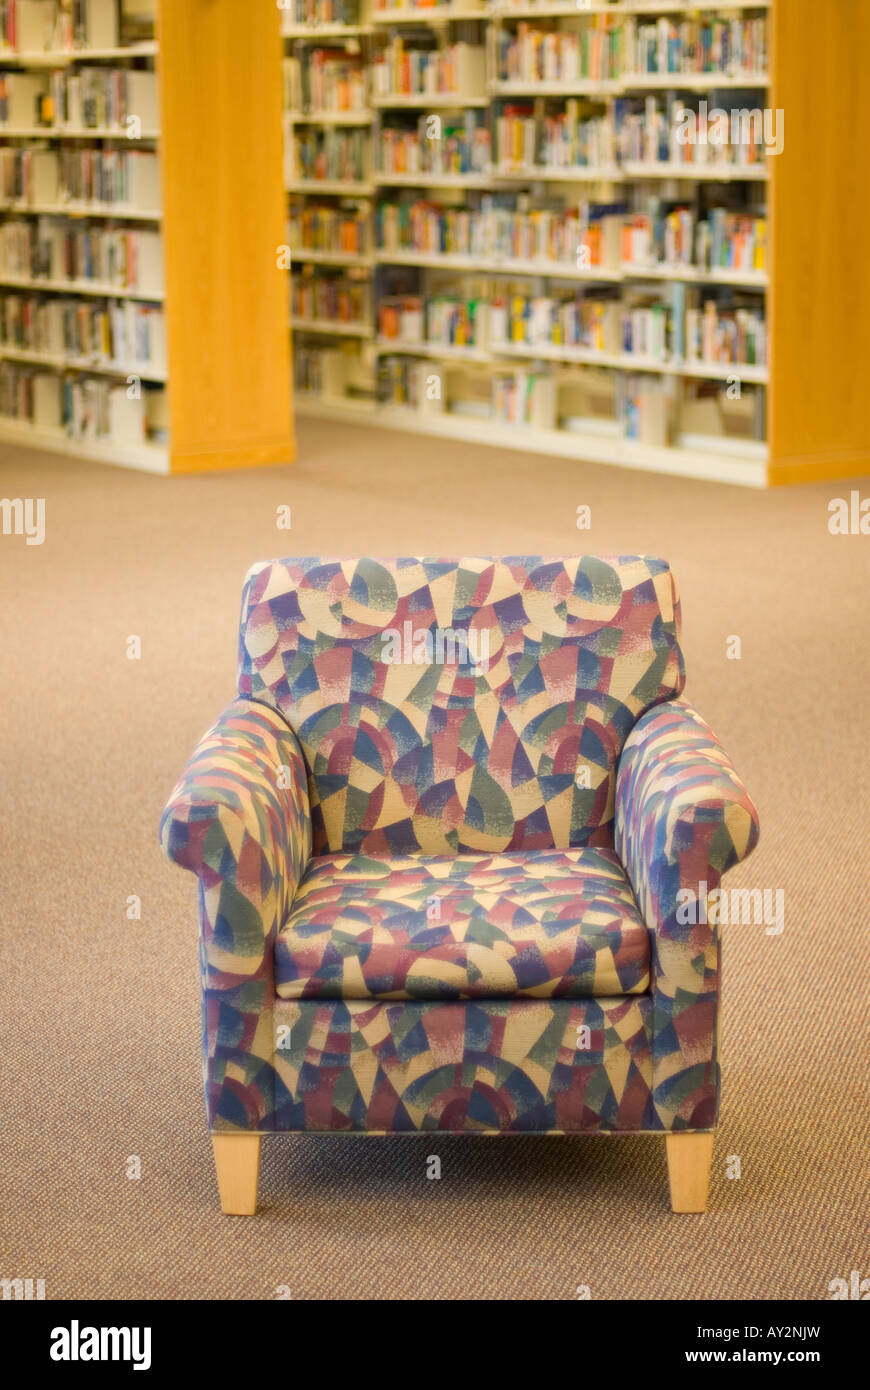 a reading chair in a library with book stacks in the background Stock Photo